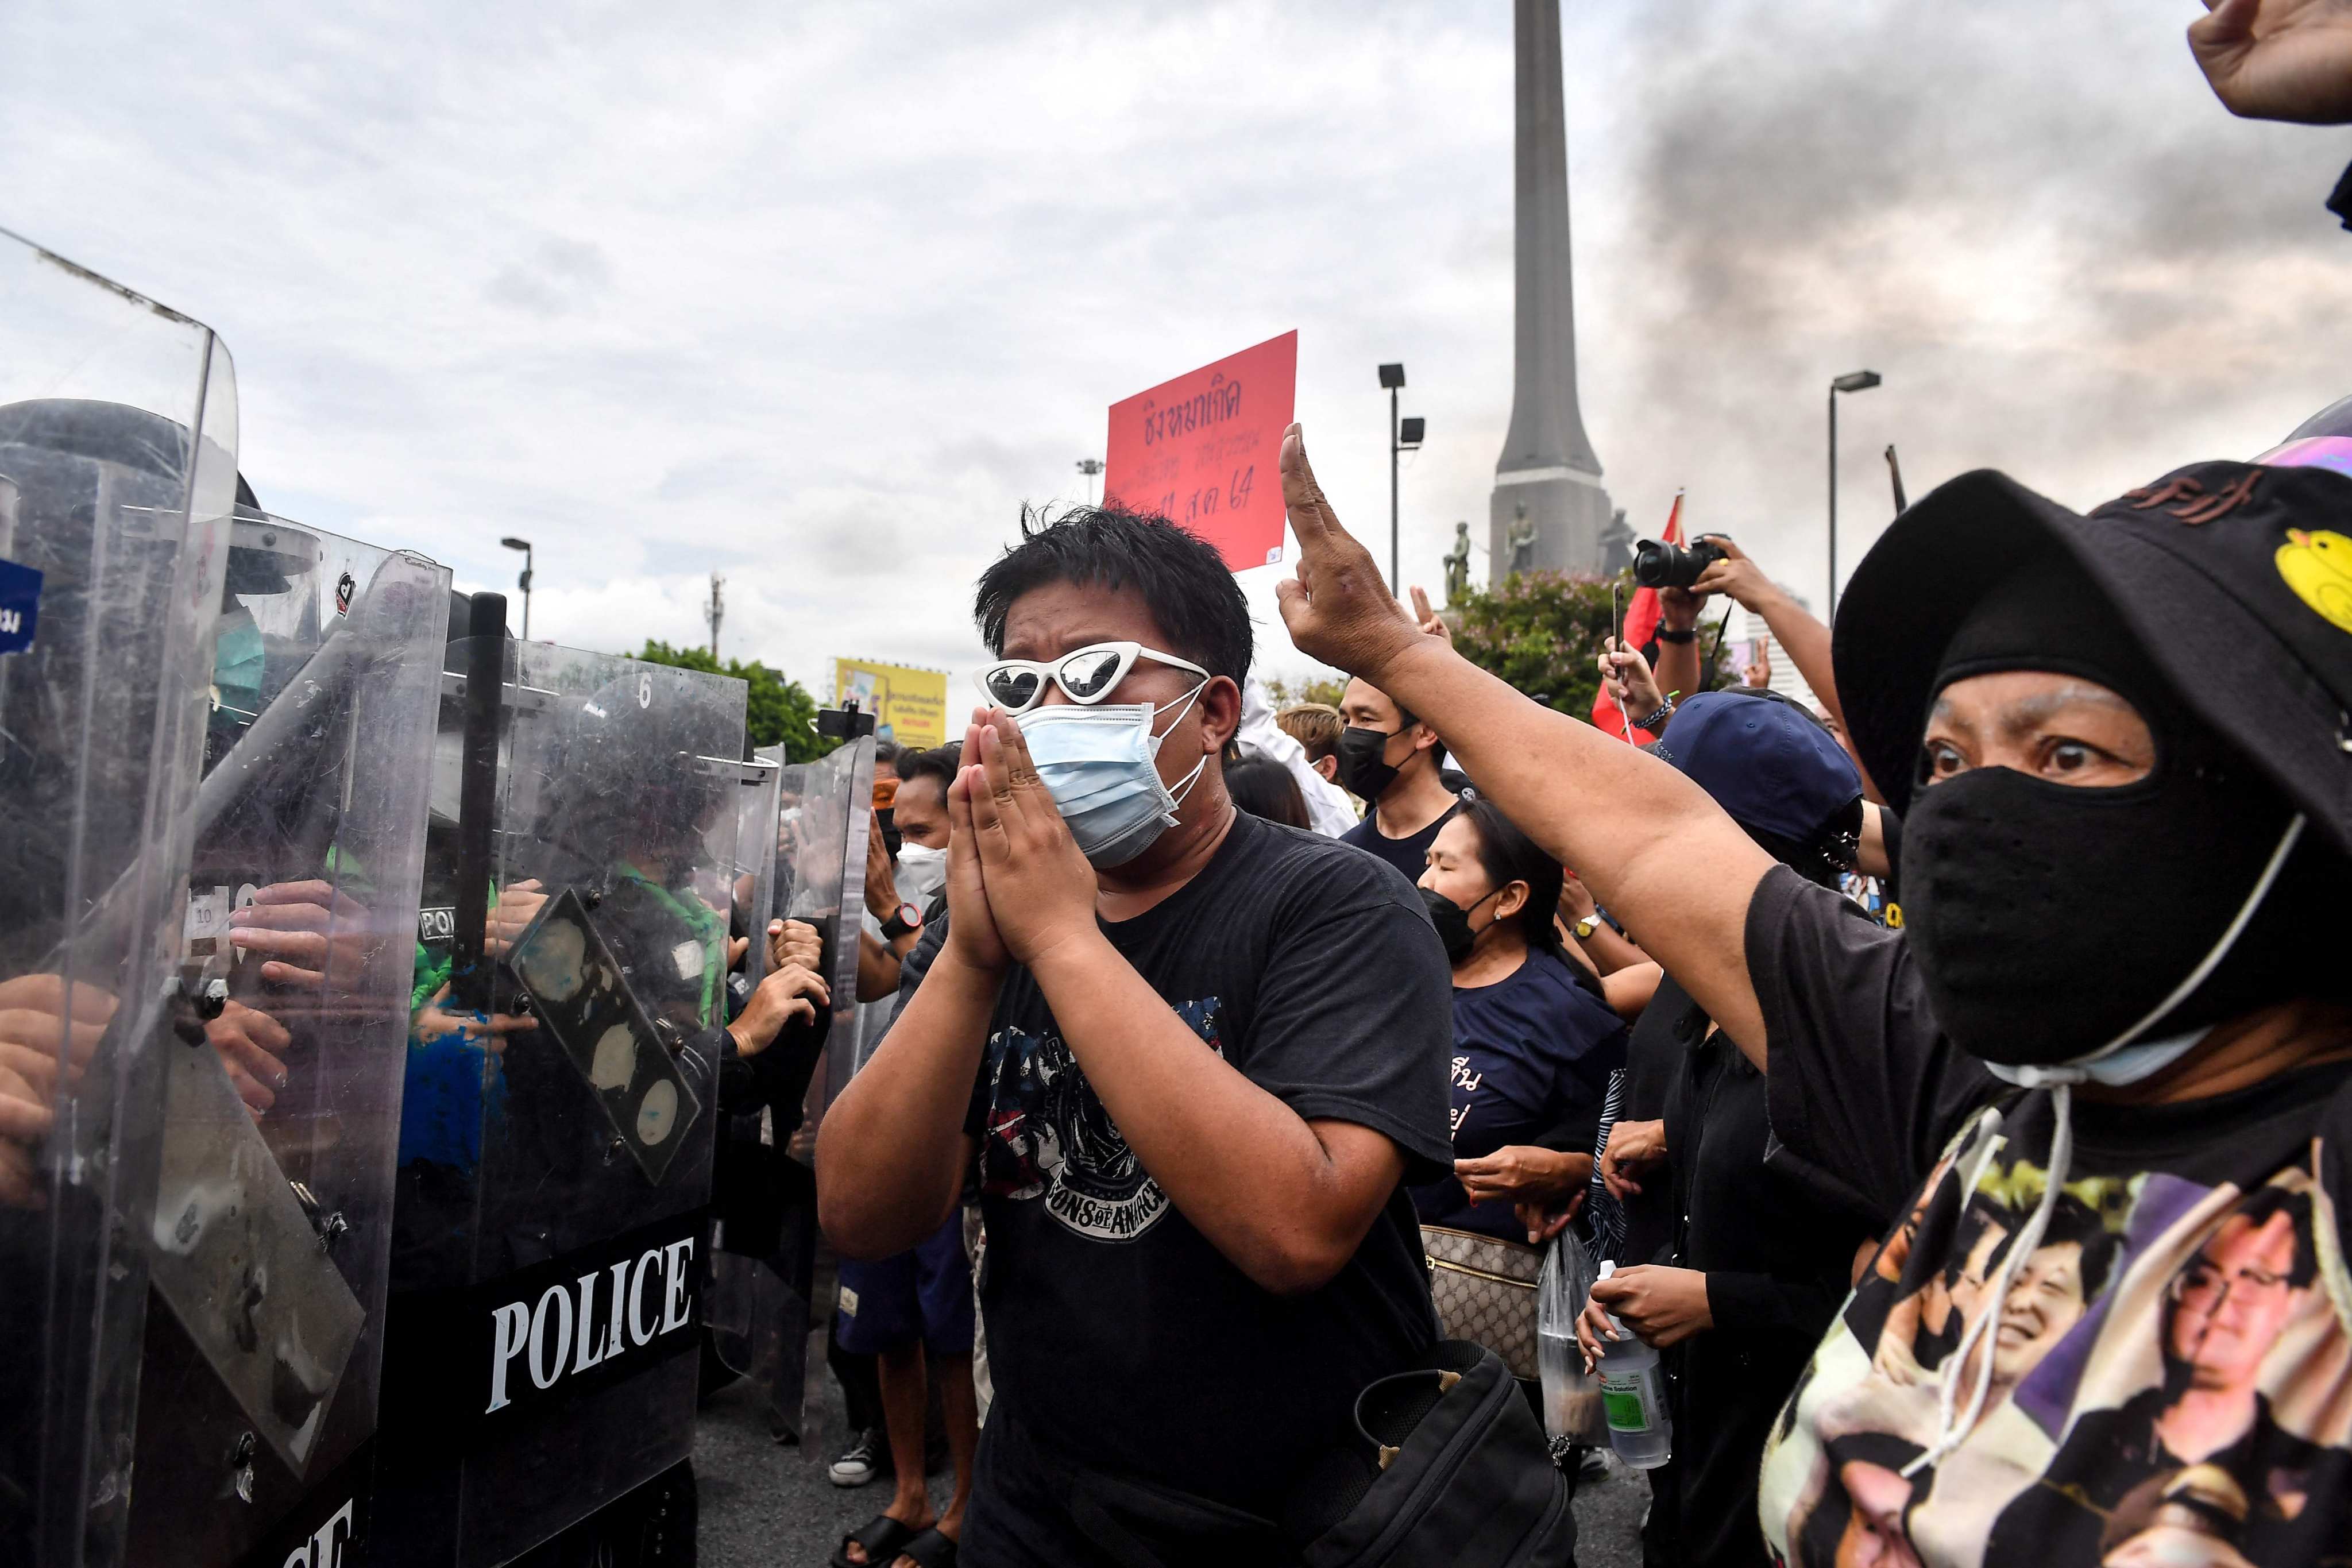 Pro-democracy protesters face a line of riot police at a protest calling for Thai Prime Minister Prayuth Chan-ocha to resign over the government’s handling of Covid-19, in Bangkok on August 11. Worldwide, many feel a greater sense of scepticism and discontent towards the establishment. Photo: AFP